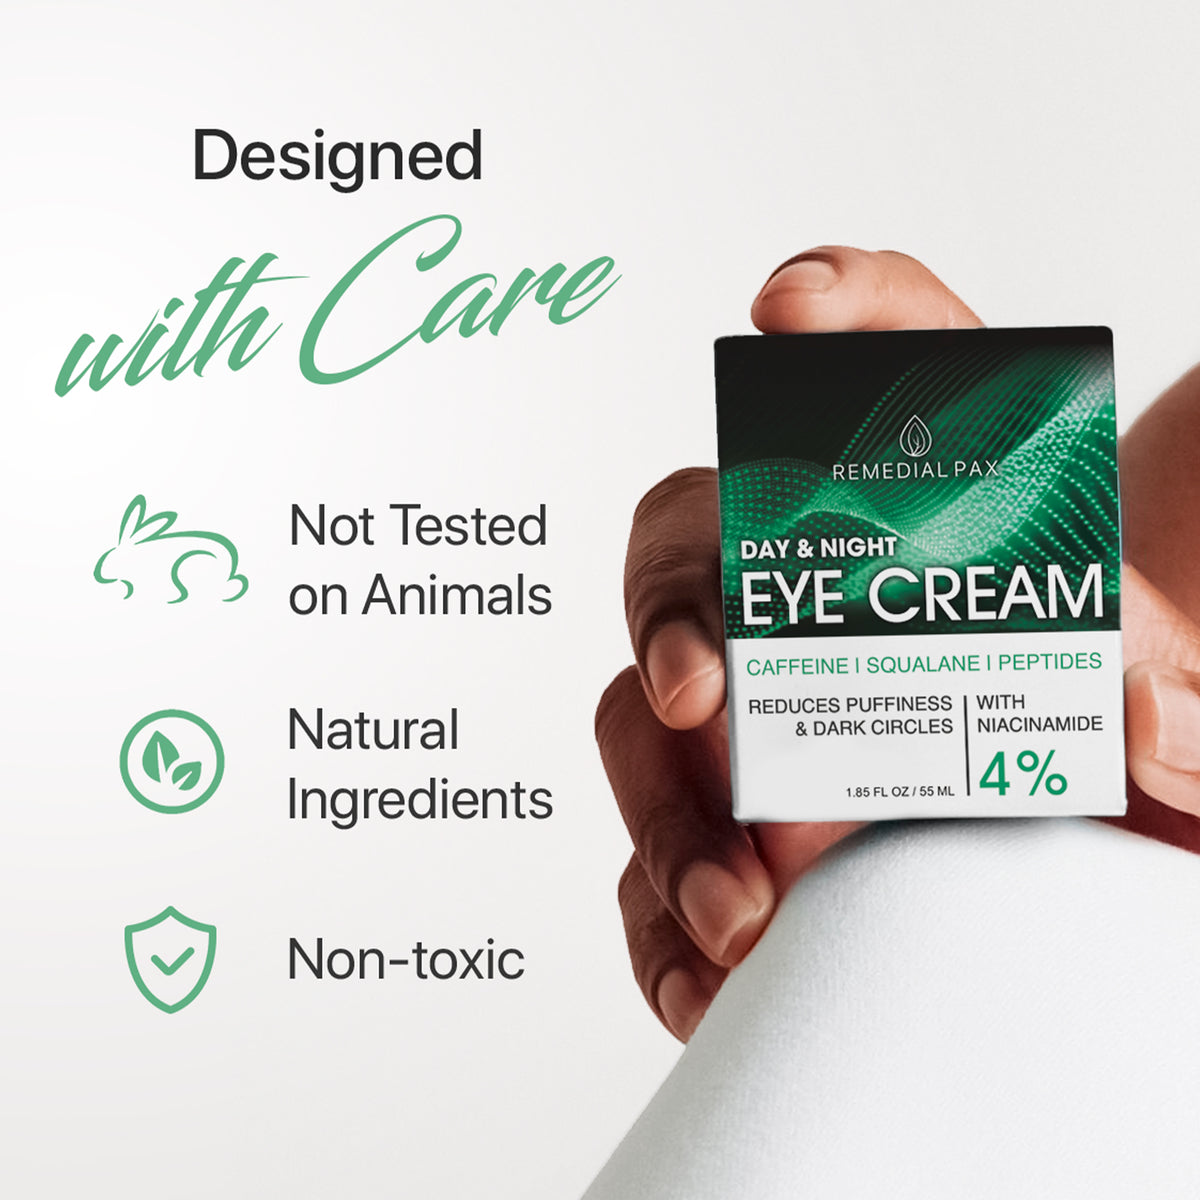 Dark Circles, Puffiness, Wrinkles, and Brightening: Eye Cream Sale with Niacinamide